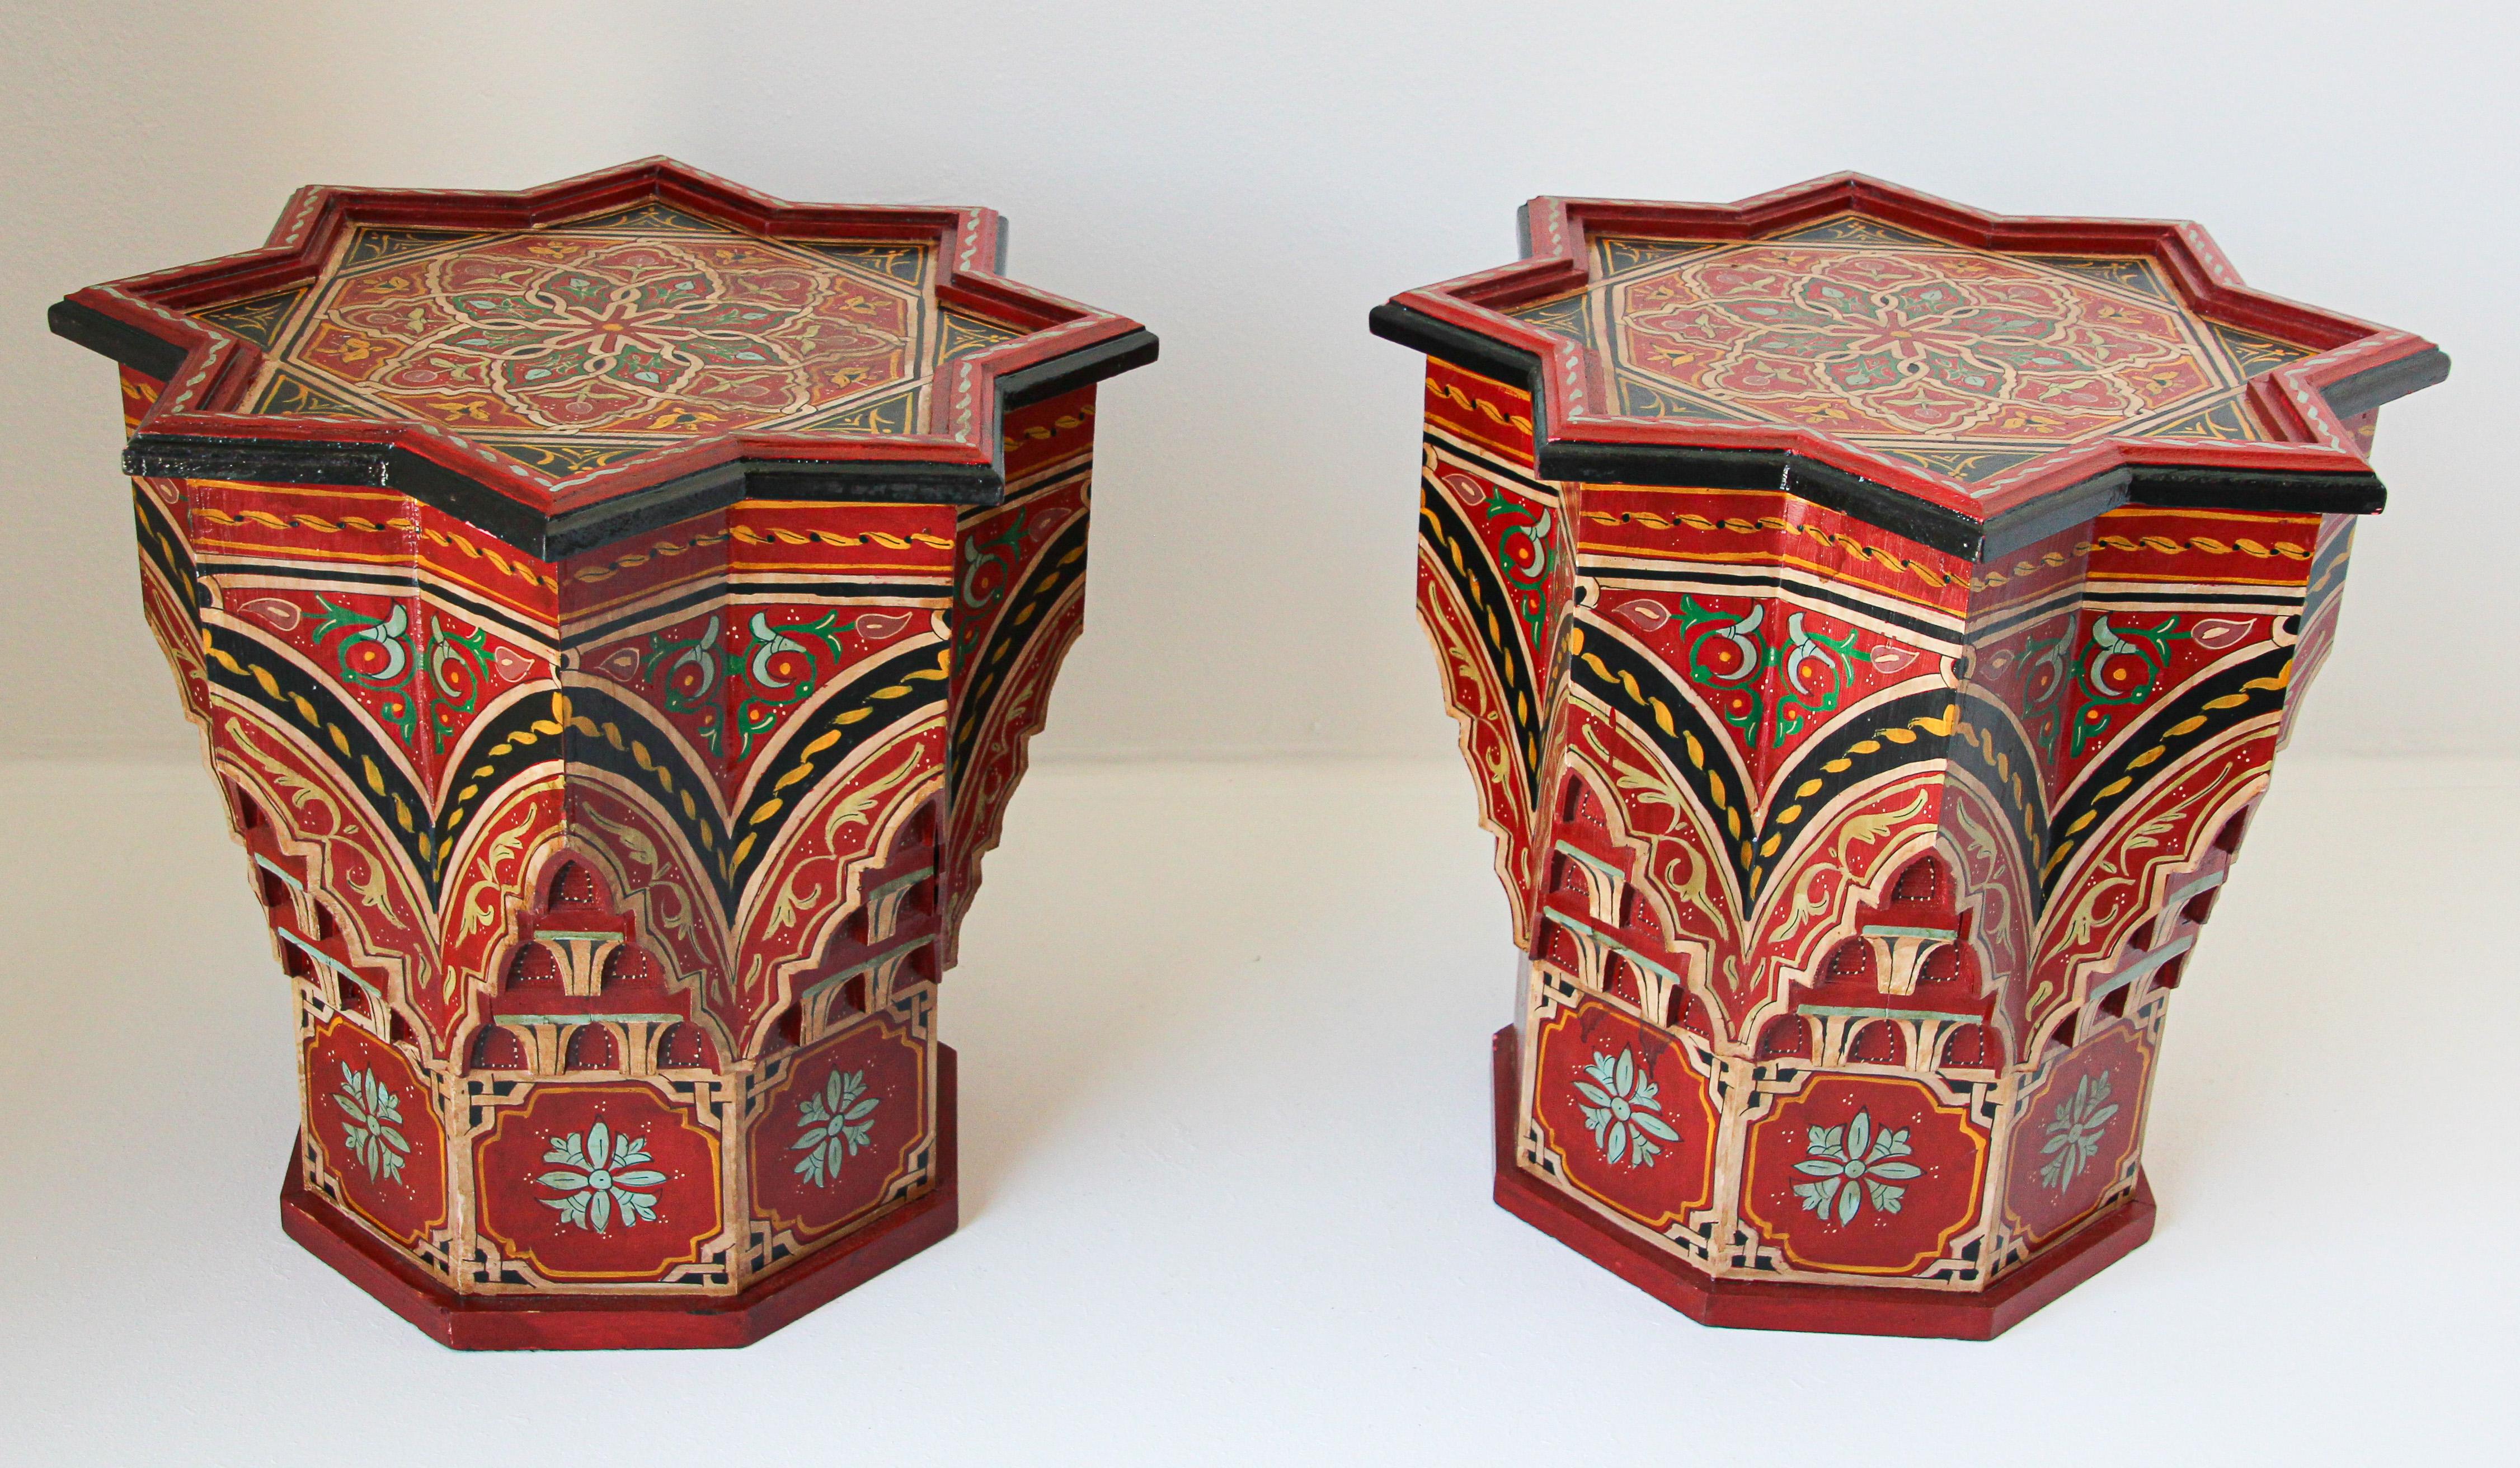 Pair of Moroccan colorful red hand painted and carved side occasional table with Moorish Islamic designs.
Vintage Moroccan Pedestal tables in red background with multicolored floral and geometric designs.
Very decorative Moroccan tables with fine